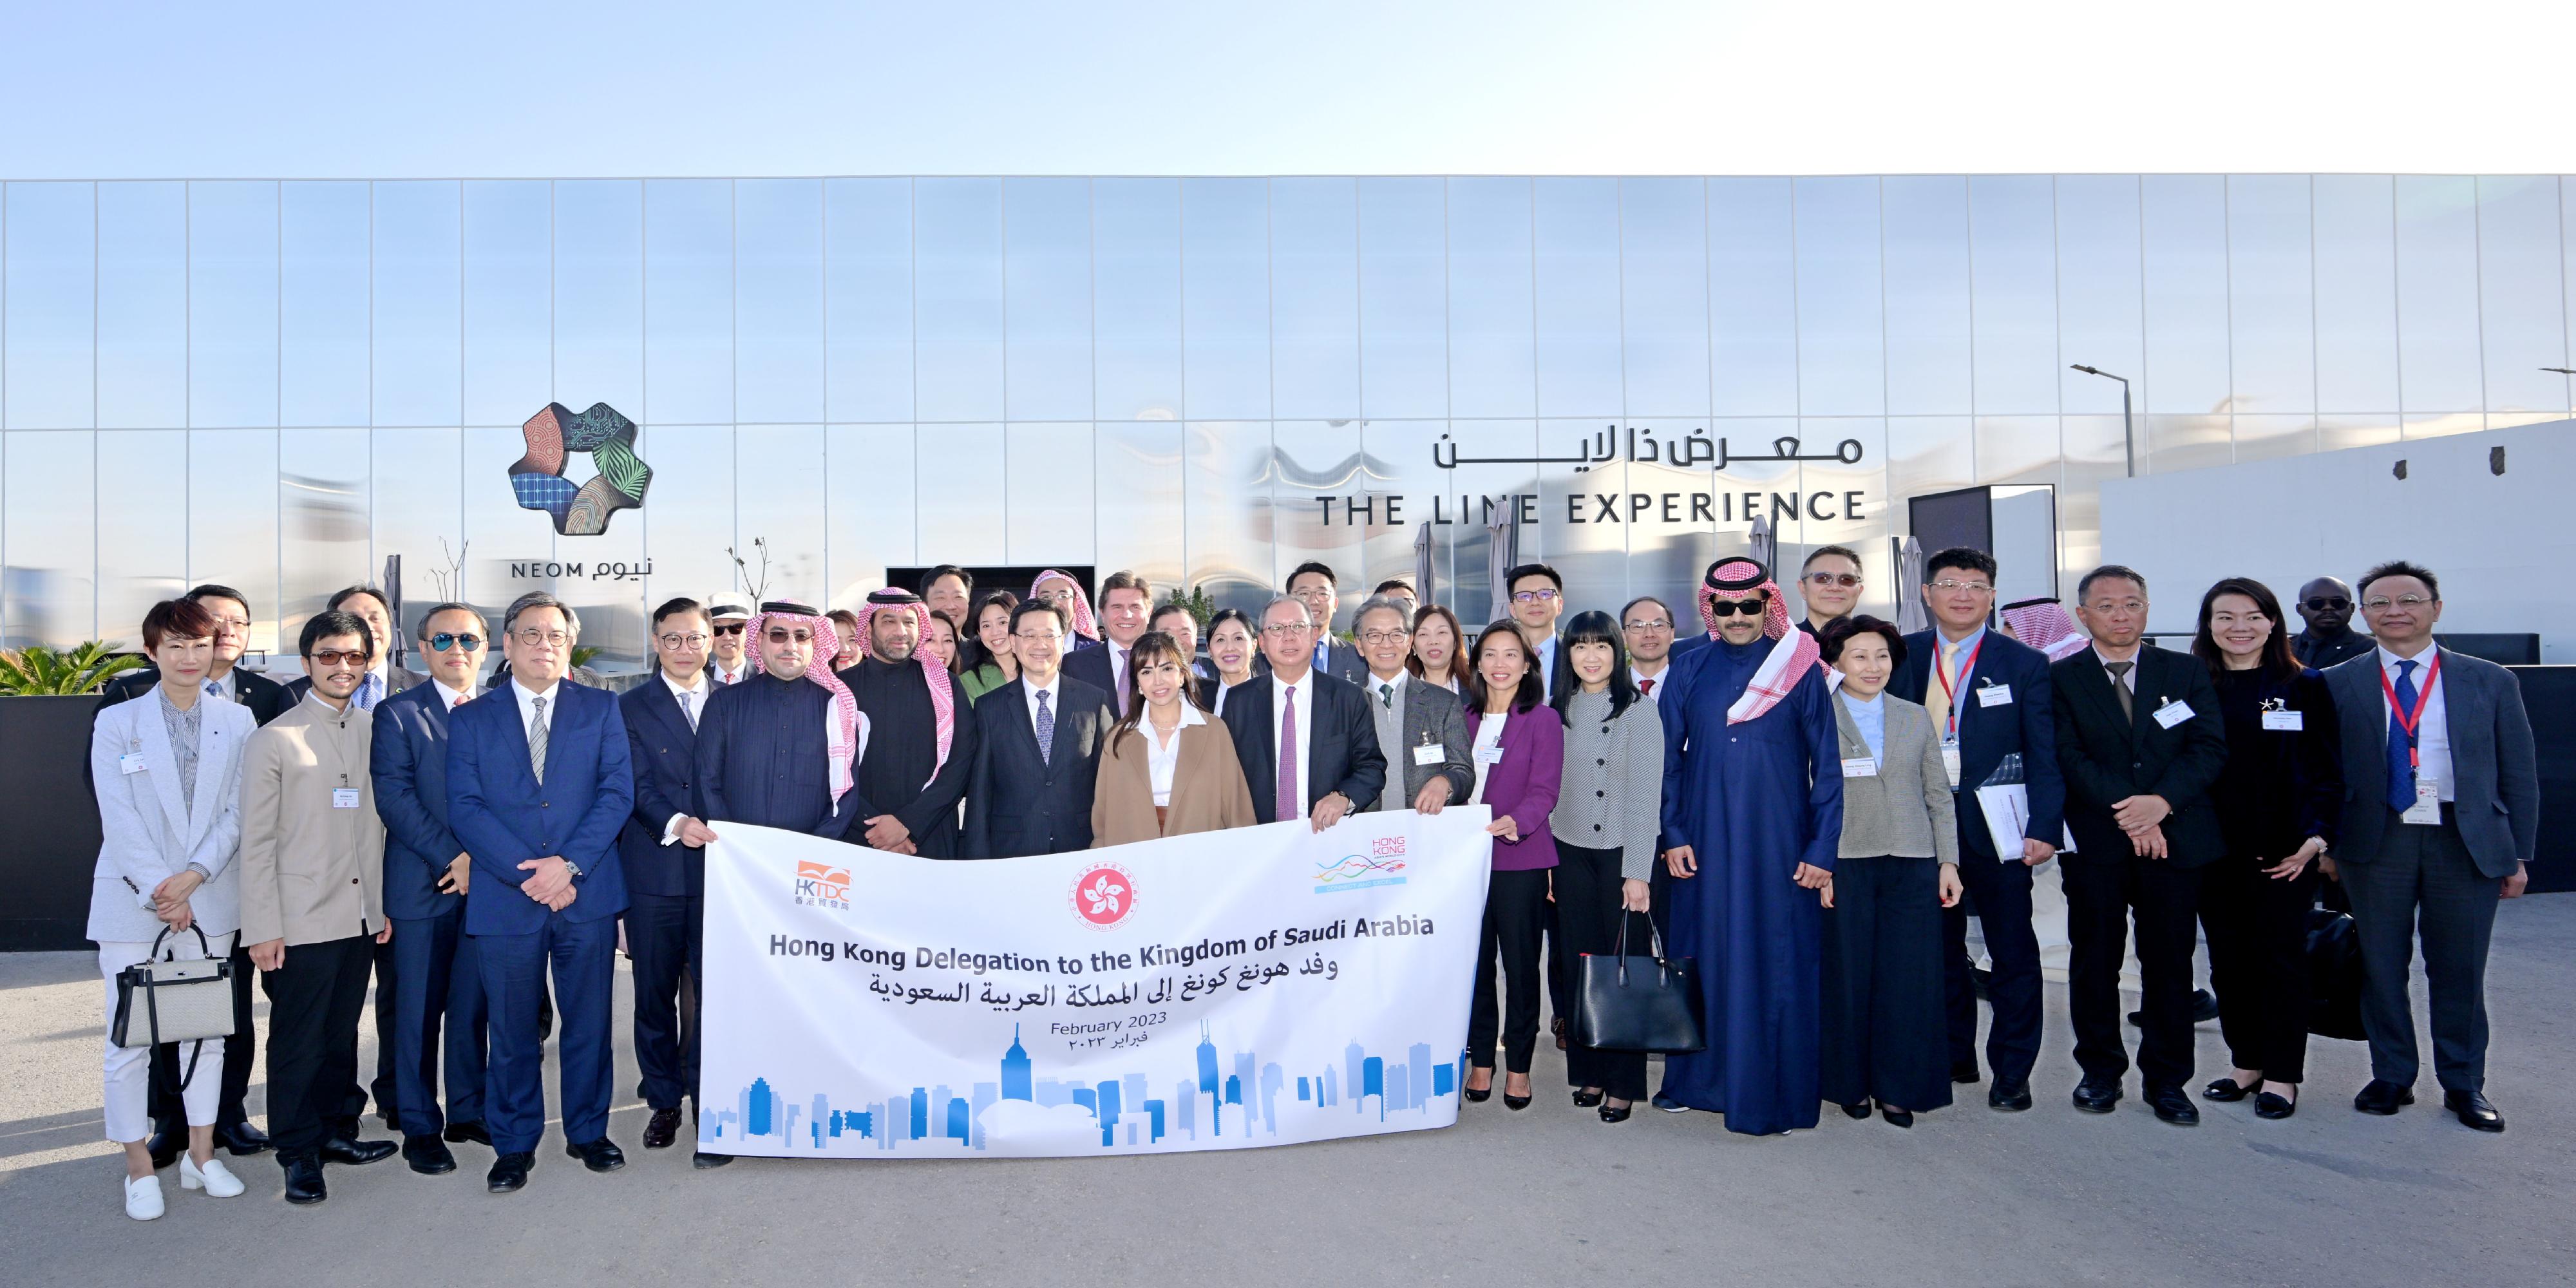 The Chief Executive, Mr John Lee, in Riyadh, Saudi Arabia, today (February 5, Riyadh time) tours "THE LINE Experience" exhibition to learn about the innovative urban designs of the futuristic city NEOM. Photo shows the Secretary for Financial Services and the Treasury, Mr Christopher Hui (third left, front row); the Secretary for Commerce and Economic Development, Mr Algernon Yau (fourth left, front row); the Deputy Secretary for Justice, Mr Cheung Kwok-kwan (fifth left, front row); Mr Lee(eighth left, front row); the Chairman of the Hong Kong Trade Development Council, Dr Peter Lam (tenth right, front row); the Chairman of Airport Authority Hong Kong, Mr Jack So(ninth right, front row); the Executive Director of the Hong Kong Trade Development Council, Miss Margaret Fong (seventh right, front row); the Hong Kong business delegation and representatives of the exhibition before touring the exhibition.